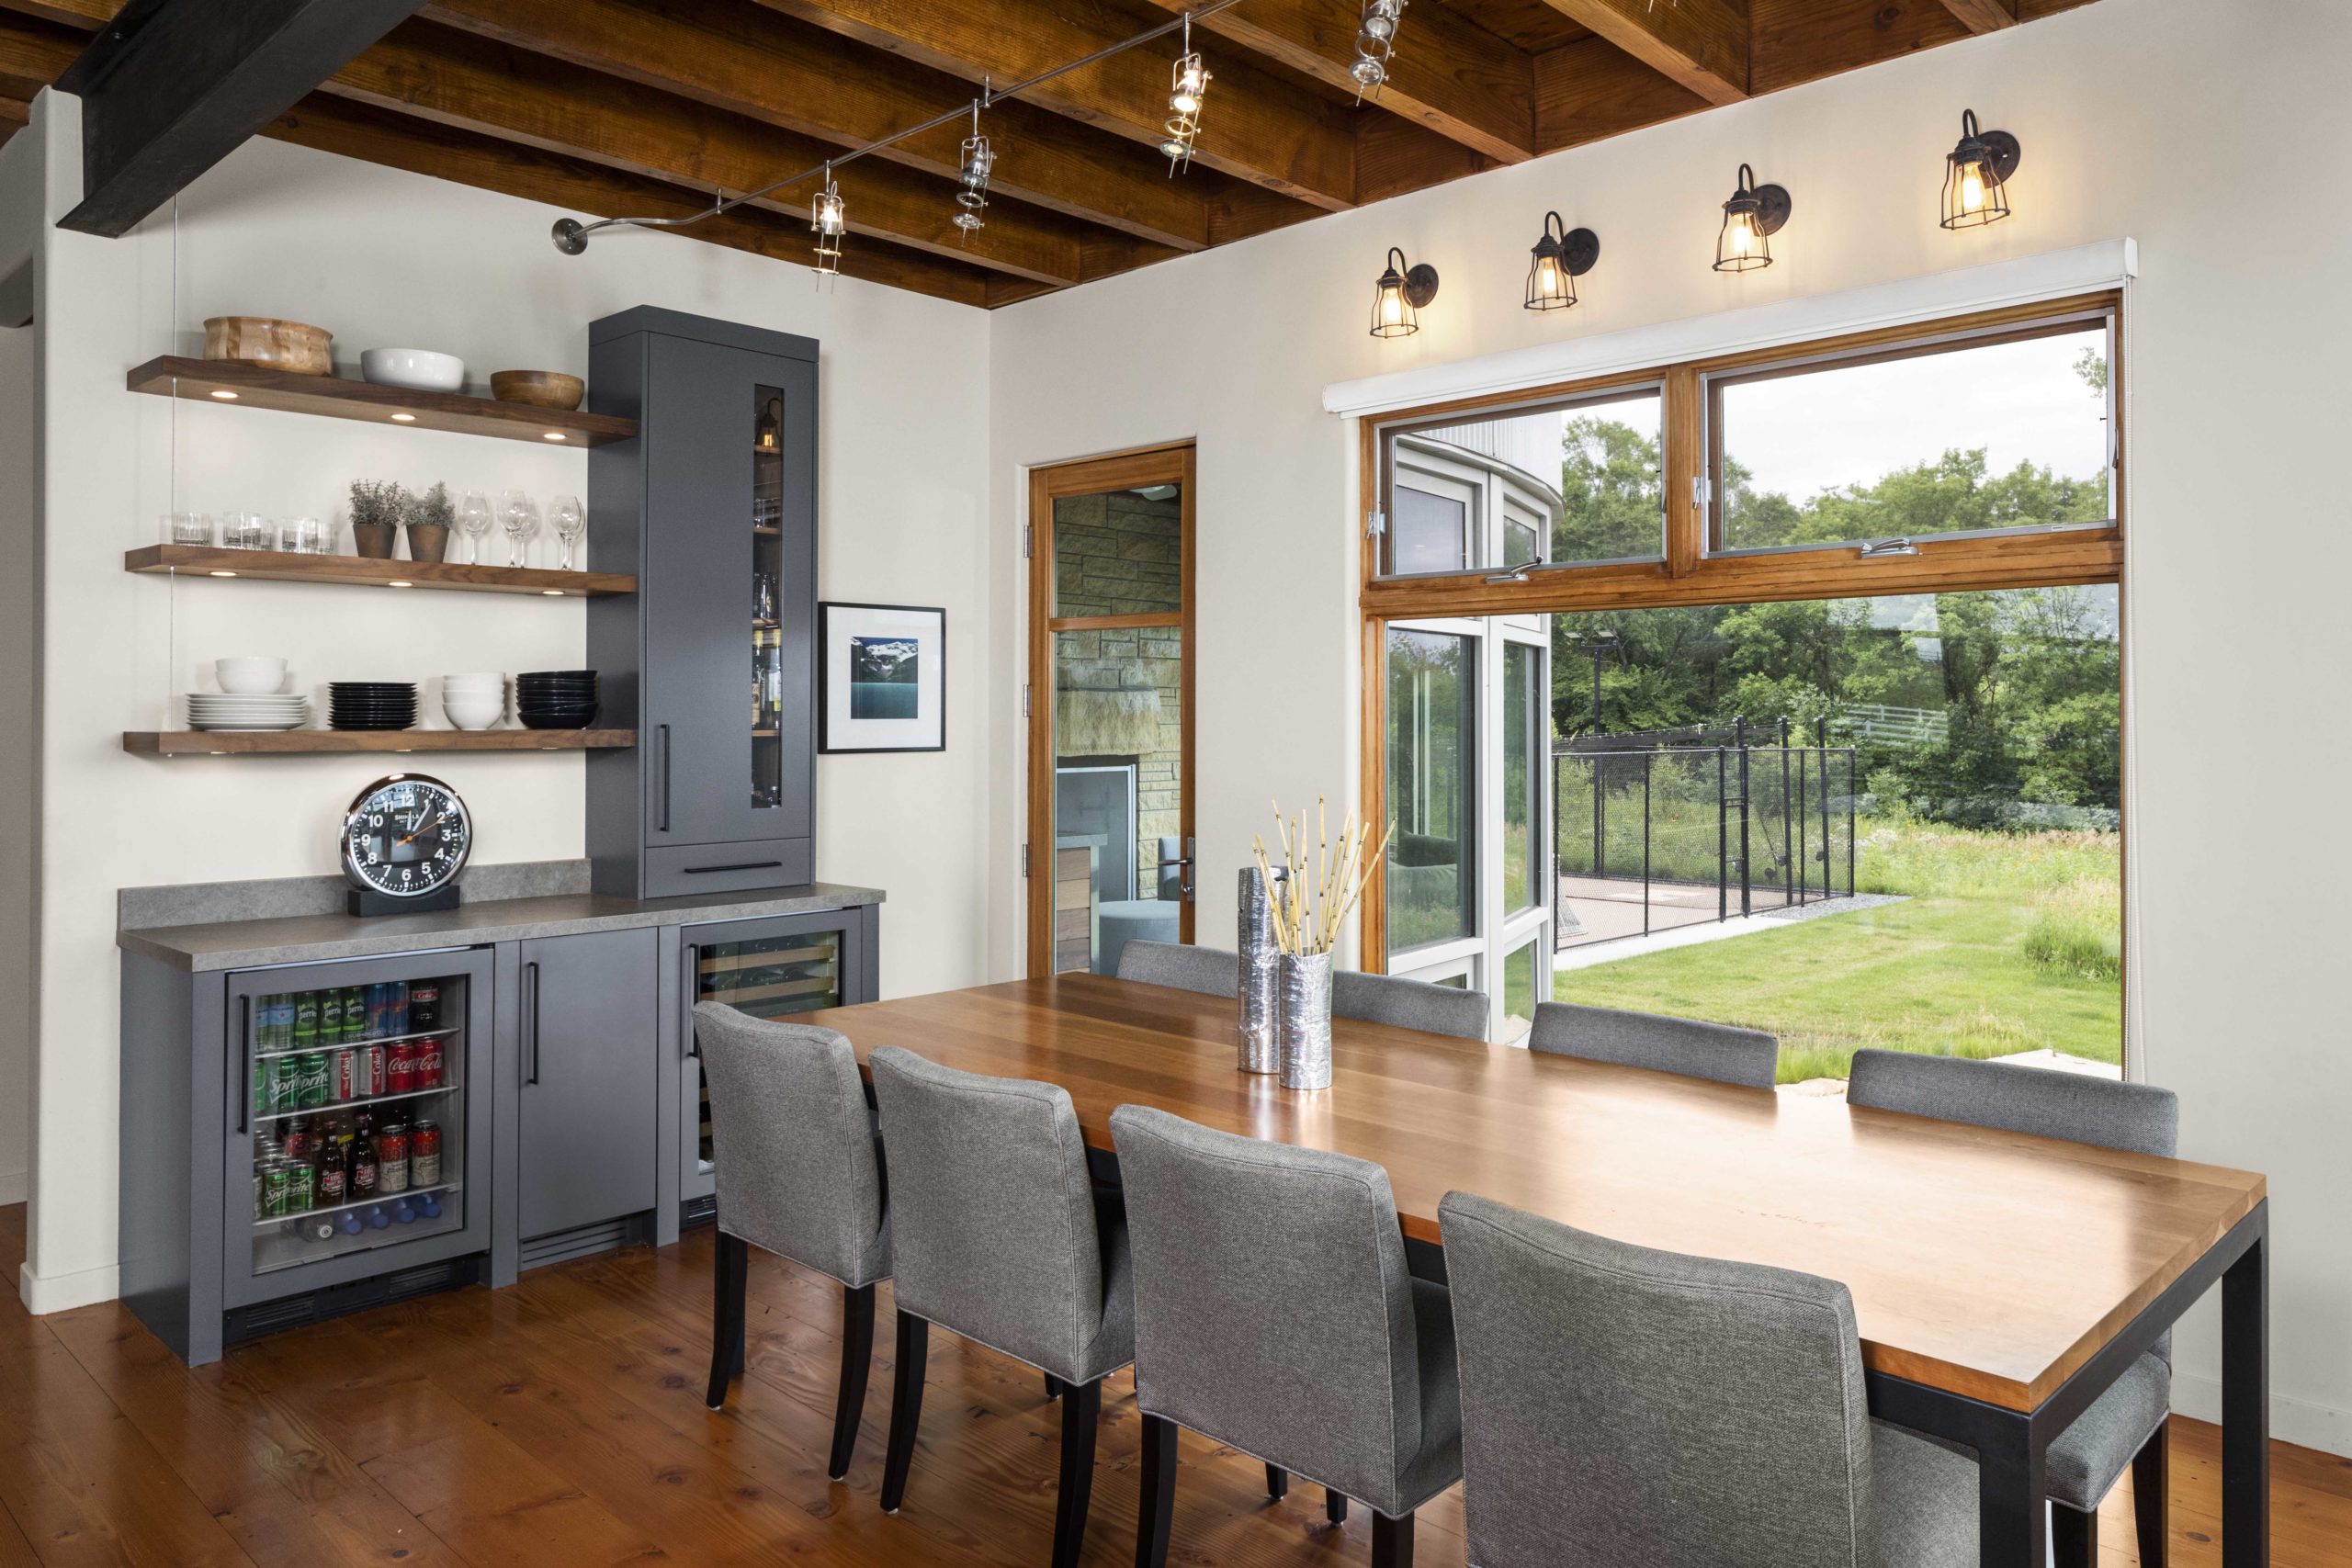 dining space overlooking country views